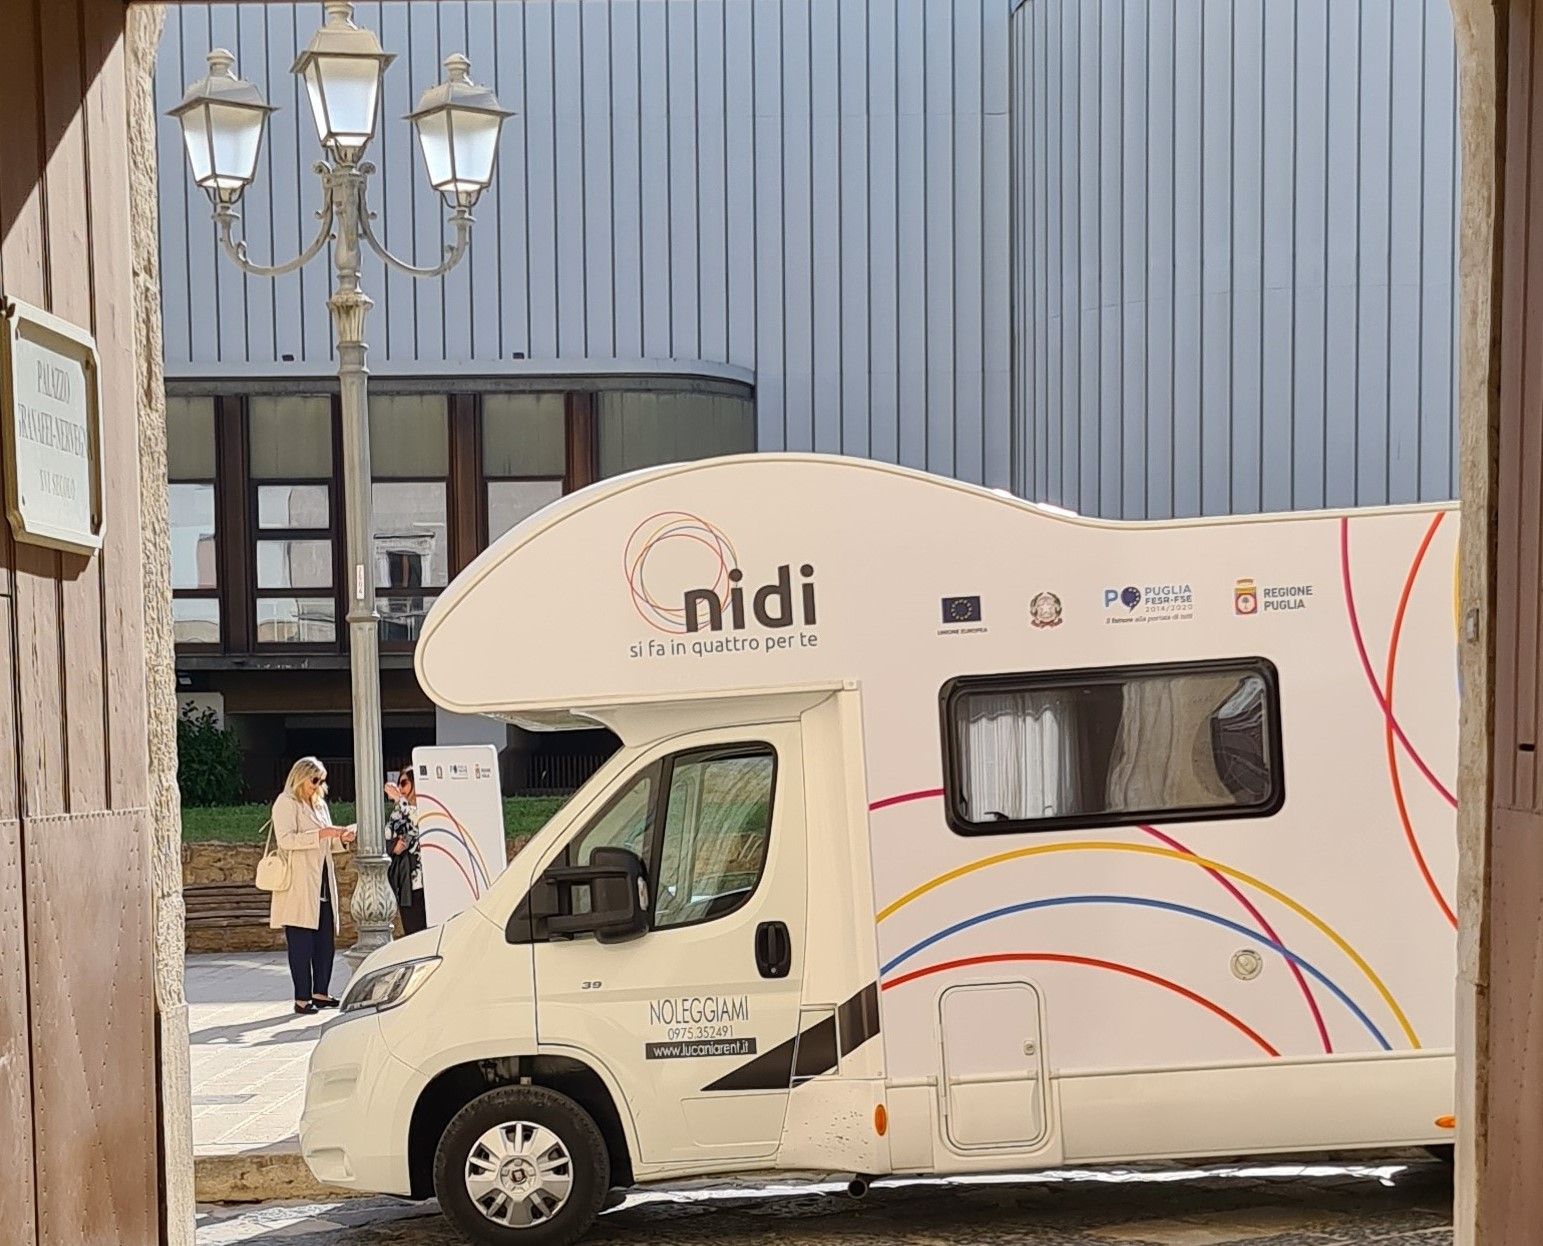 Last stage of presentation of NIDI. Delli Noci: "An important work that has allowed us to spread a renewed measure that represents an opportunity for those who want to start again"